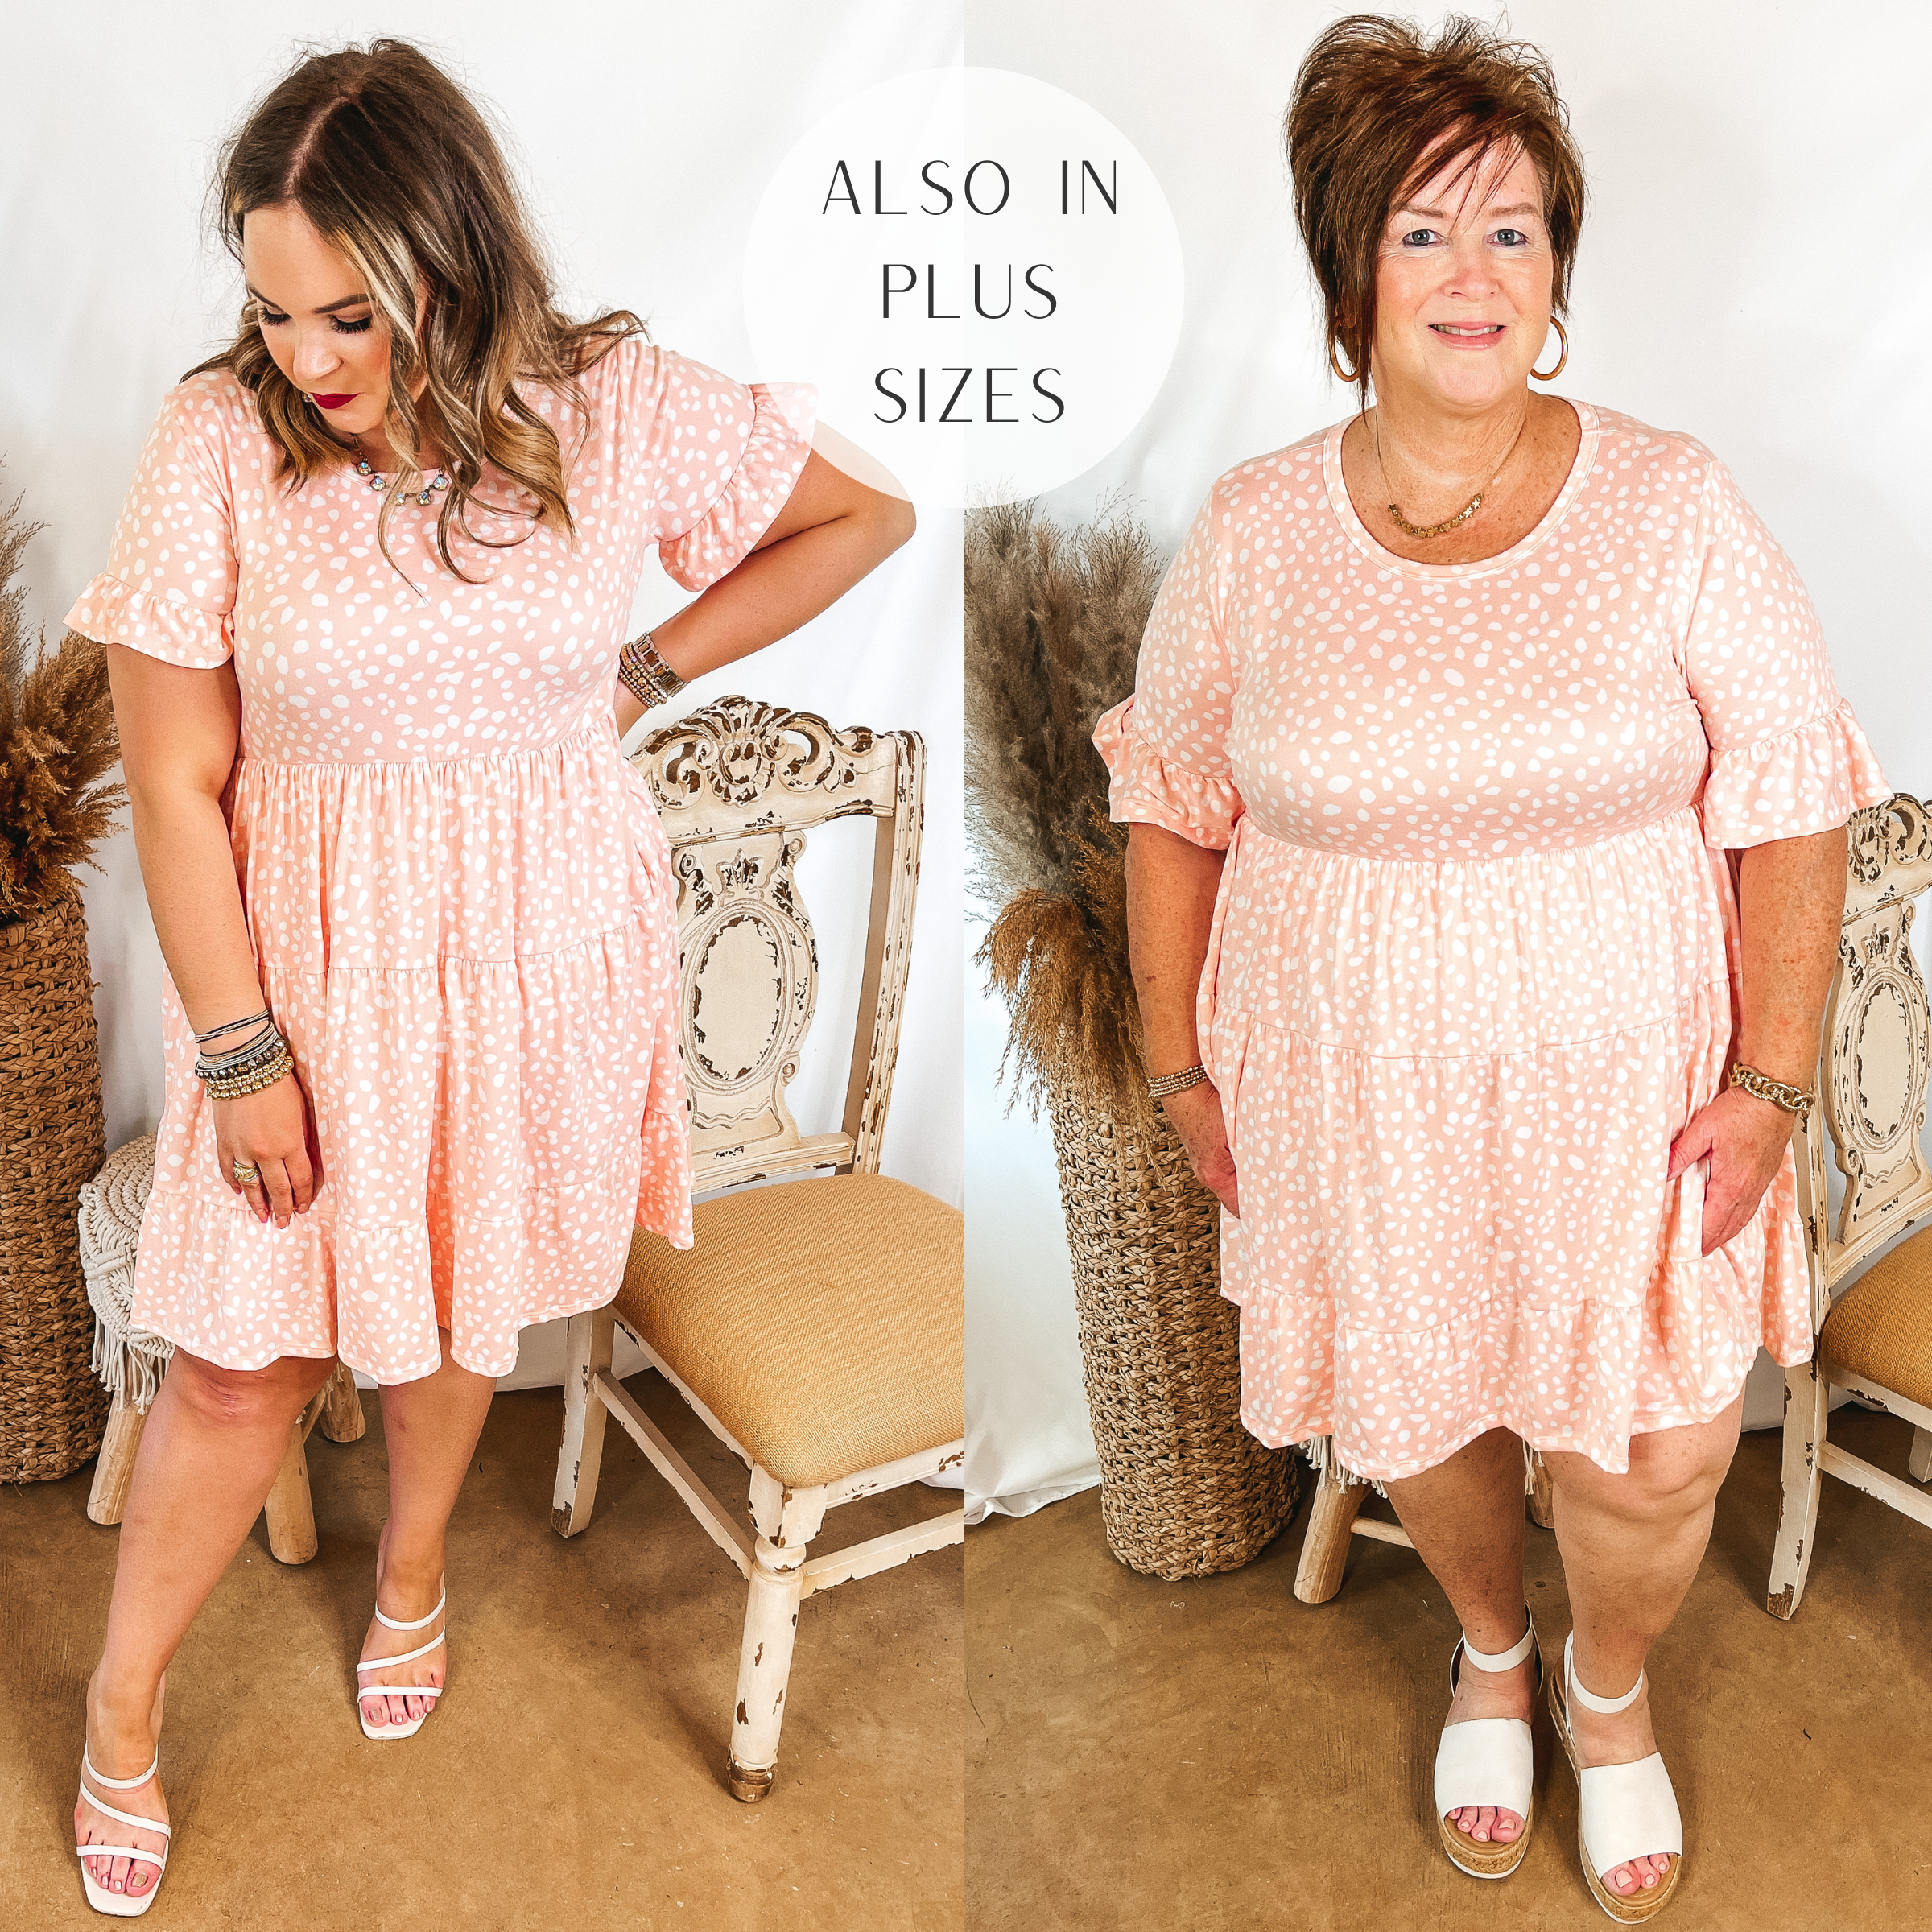 Models are wearing a peach pink dress with a white dotted print. Size large model has this babydoll dress paired with white strappy heels and silver jewelry. Plus size model has it paired with white sandals and gold jewelry.